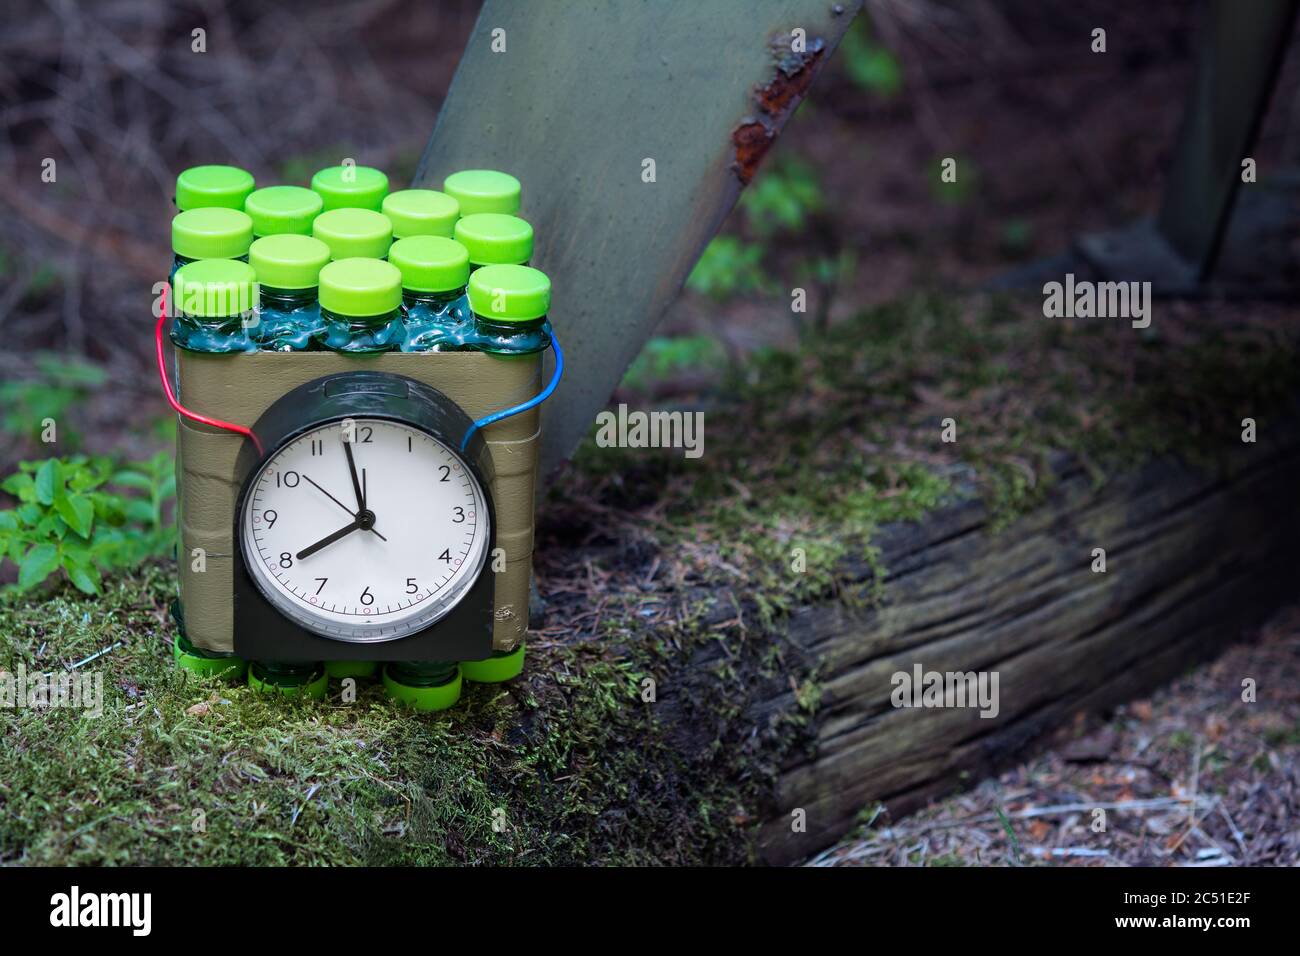 Improvised time bomb planted near metal part on old wood with green moss. Dangerous explosive device. Violent crime, terrorist act or military attack. Stock Photo